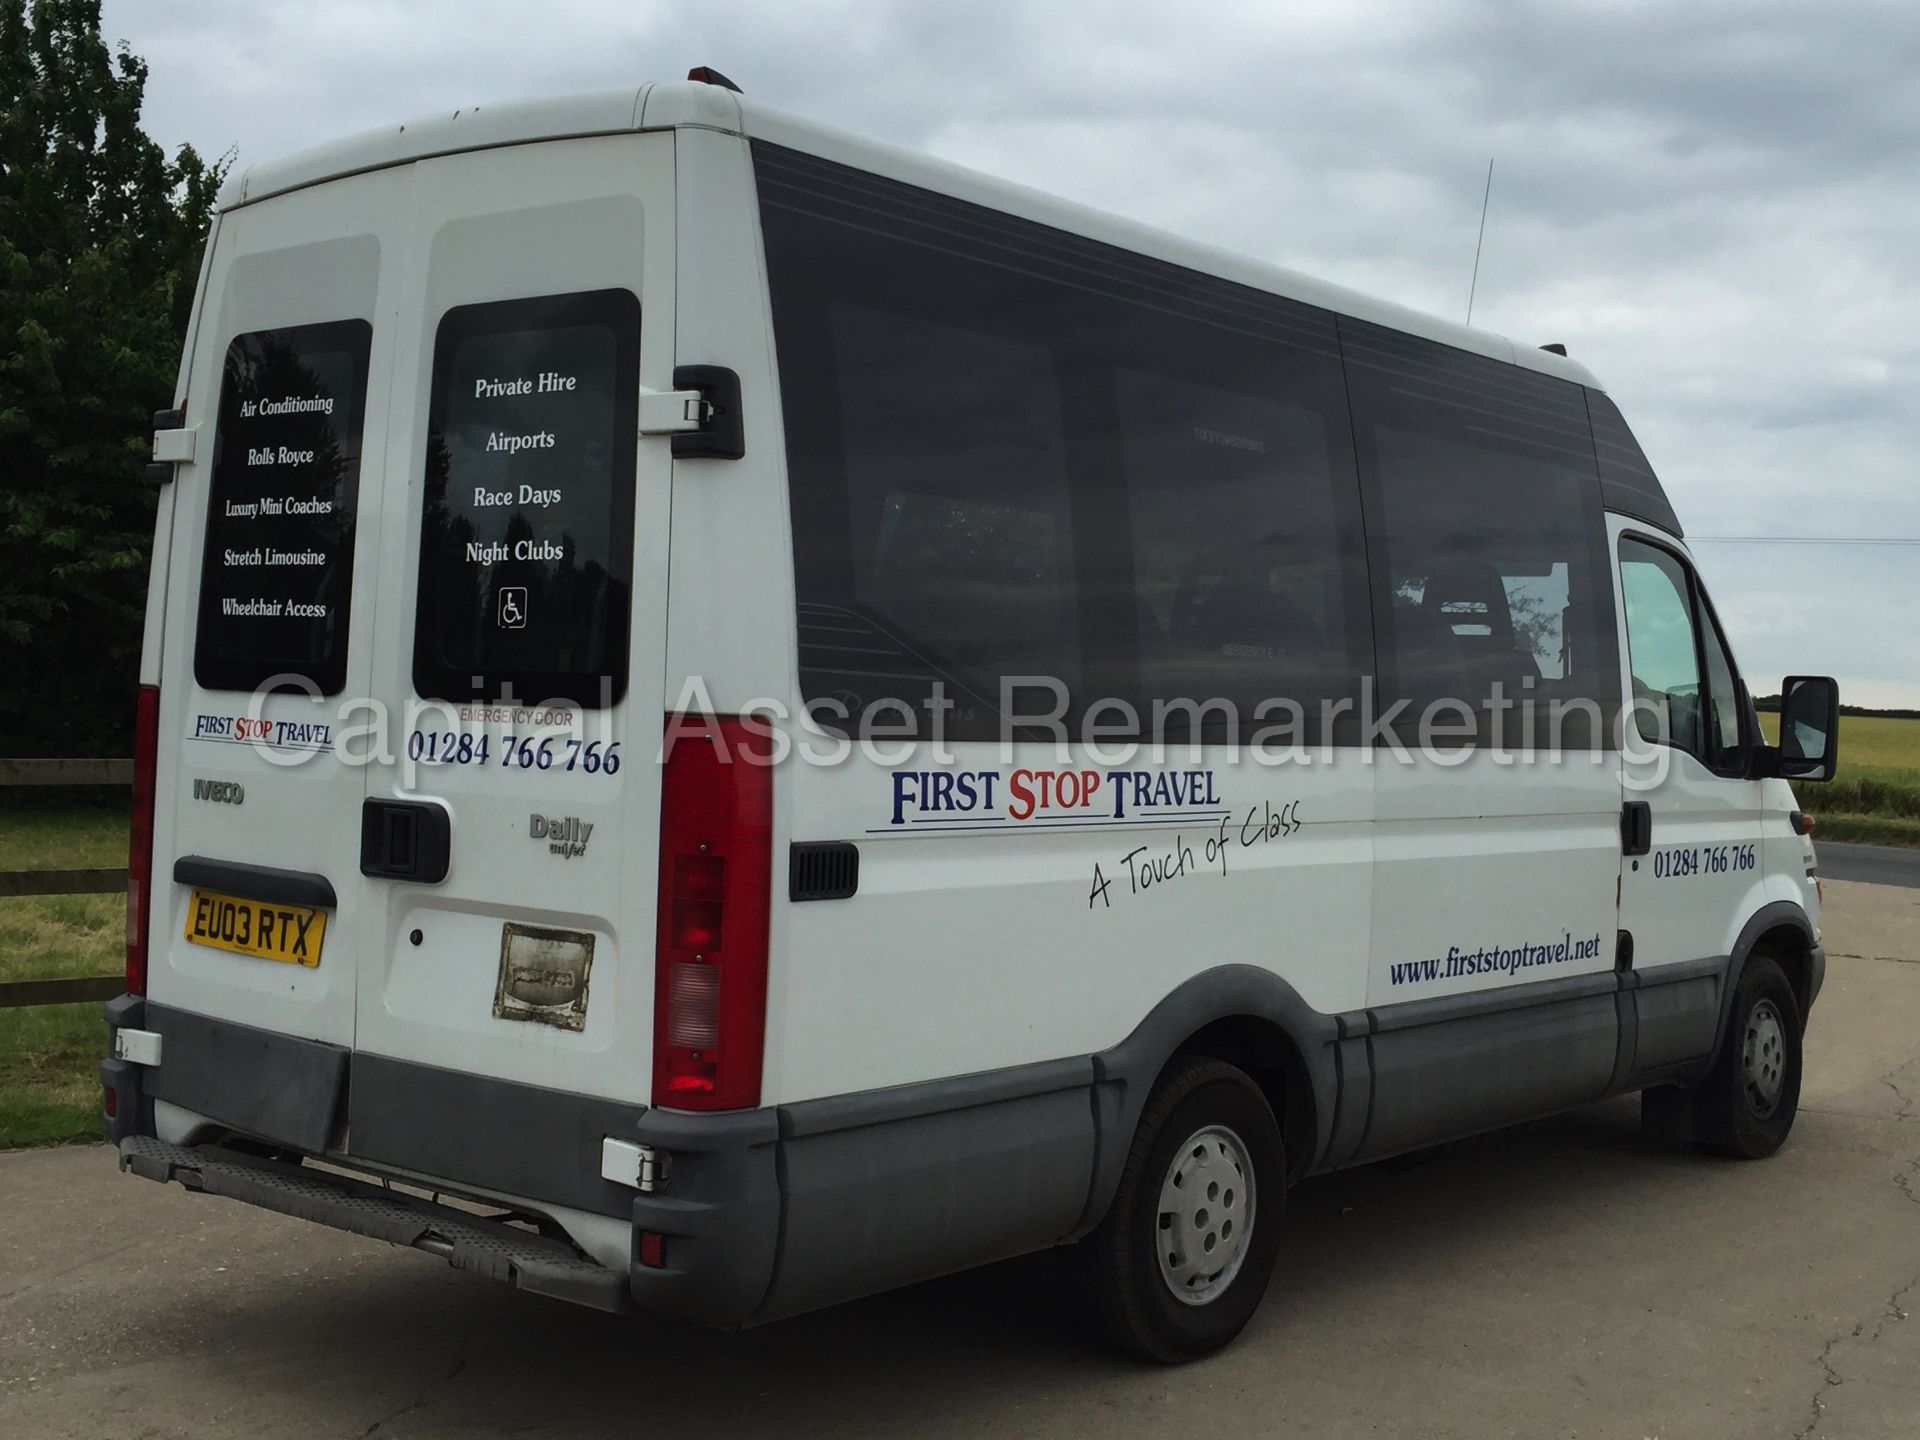 (on sale) IVECO DAILY 35S13 '14 SEATER MINI-BUS' (2003 - 03 REG) '2.3 DIESEL - 6 SPEED' (NO VAT) - Image 7 of 23